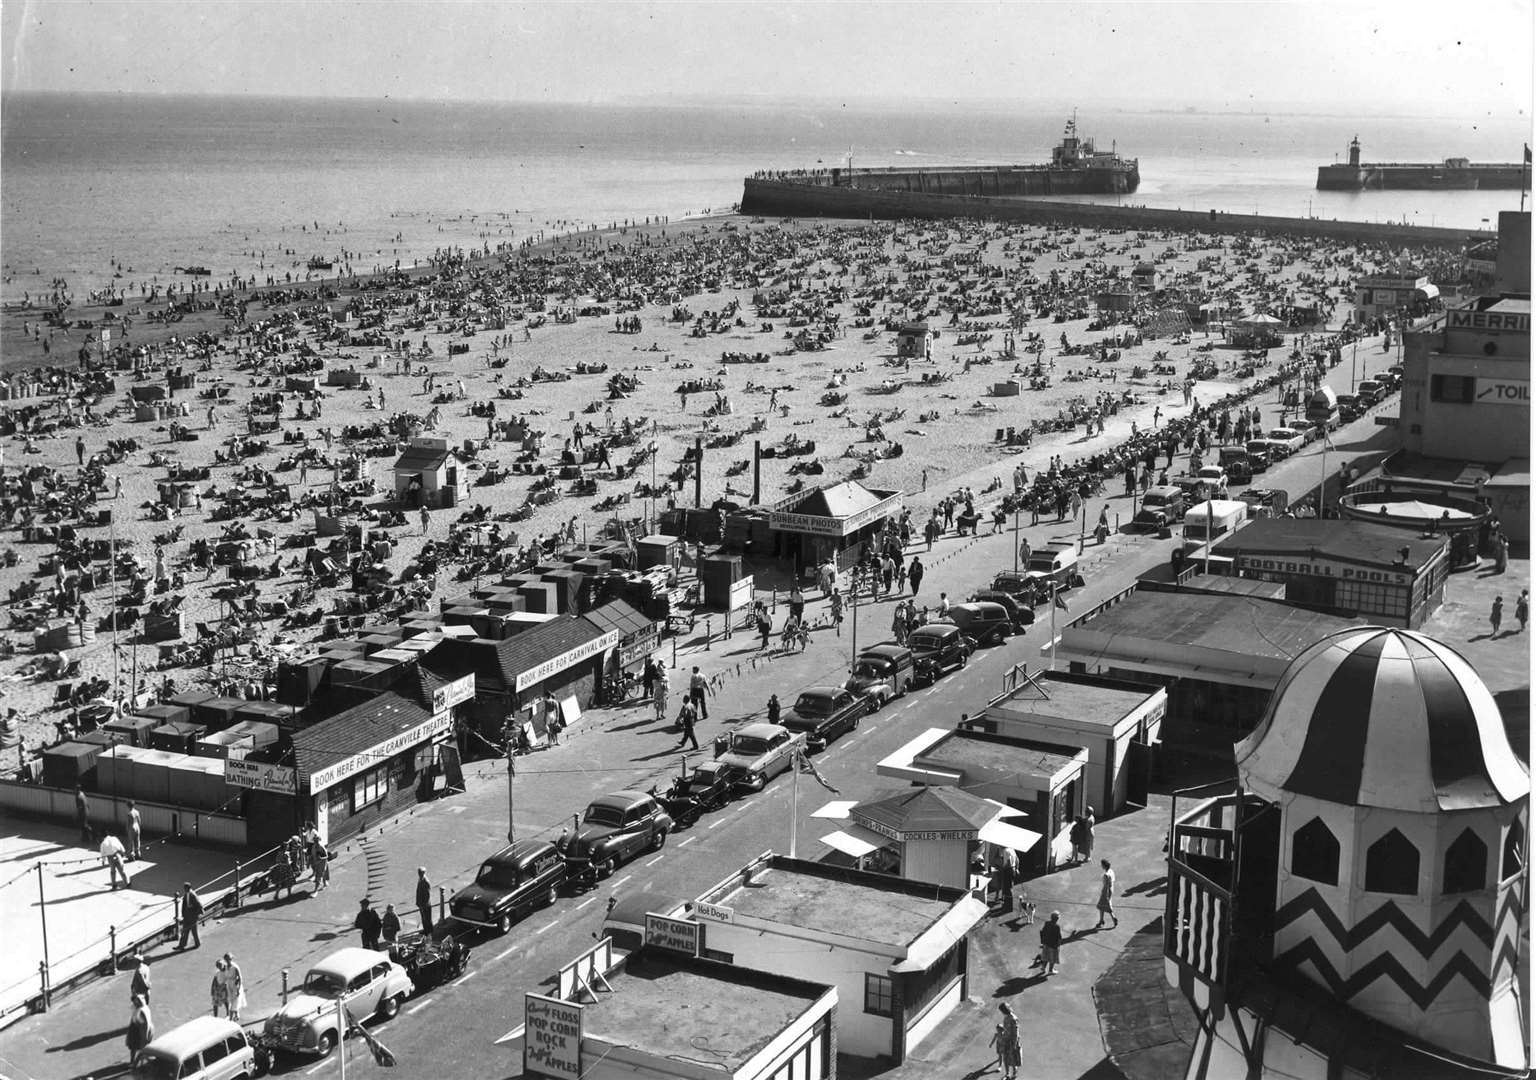 A packed Ramsgate beach in 1959